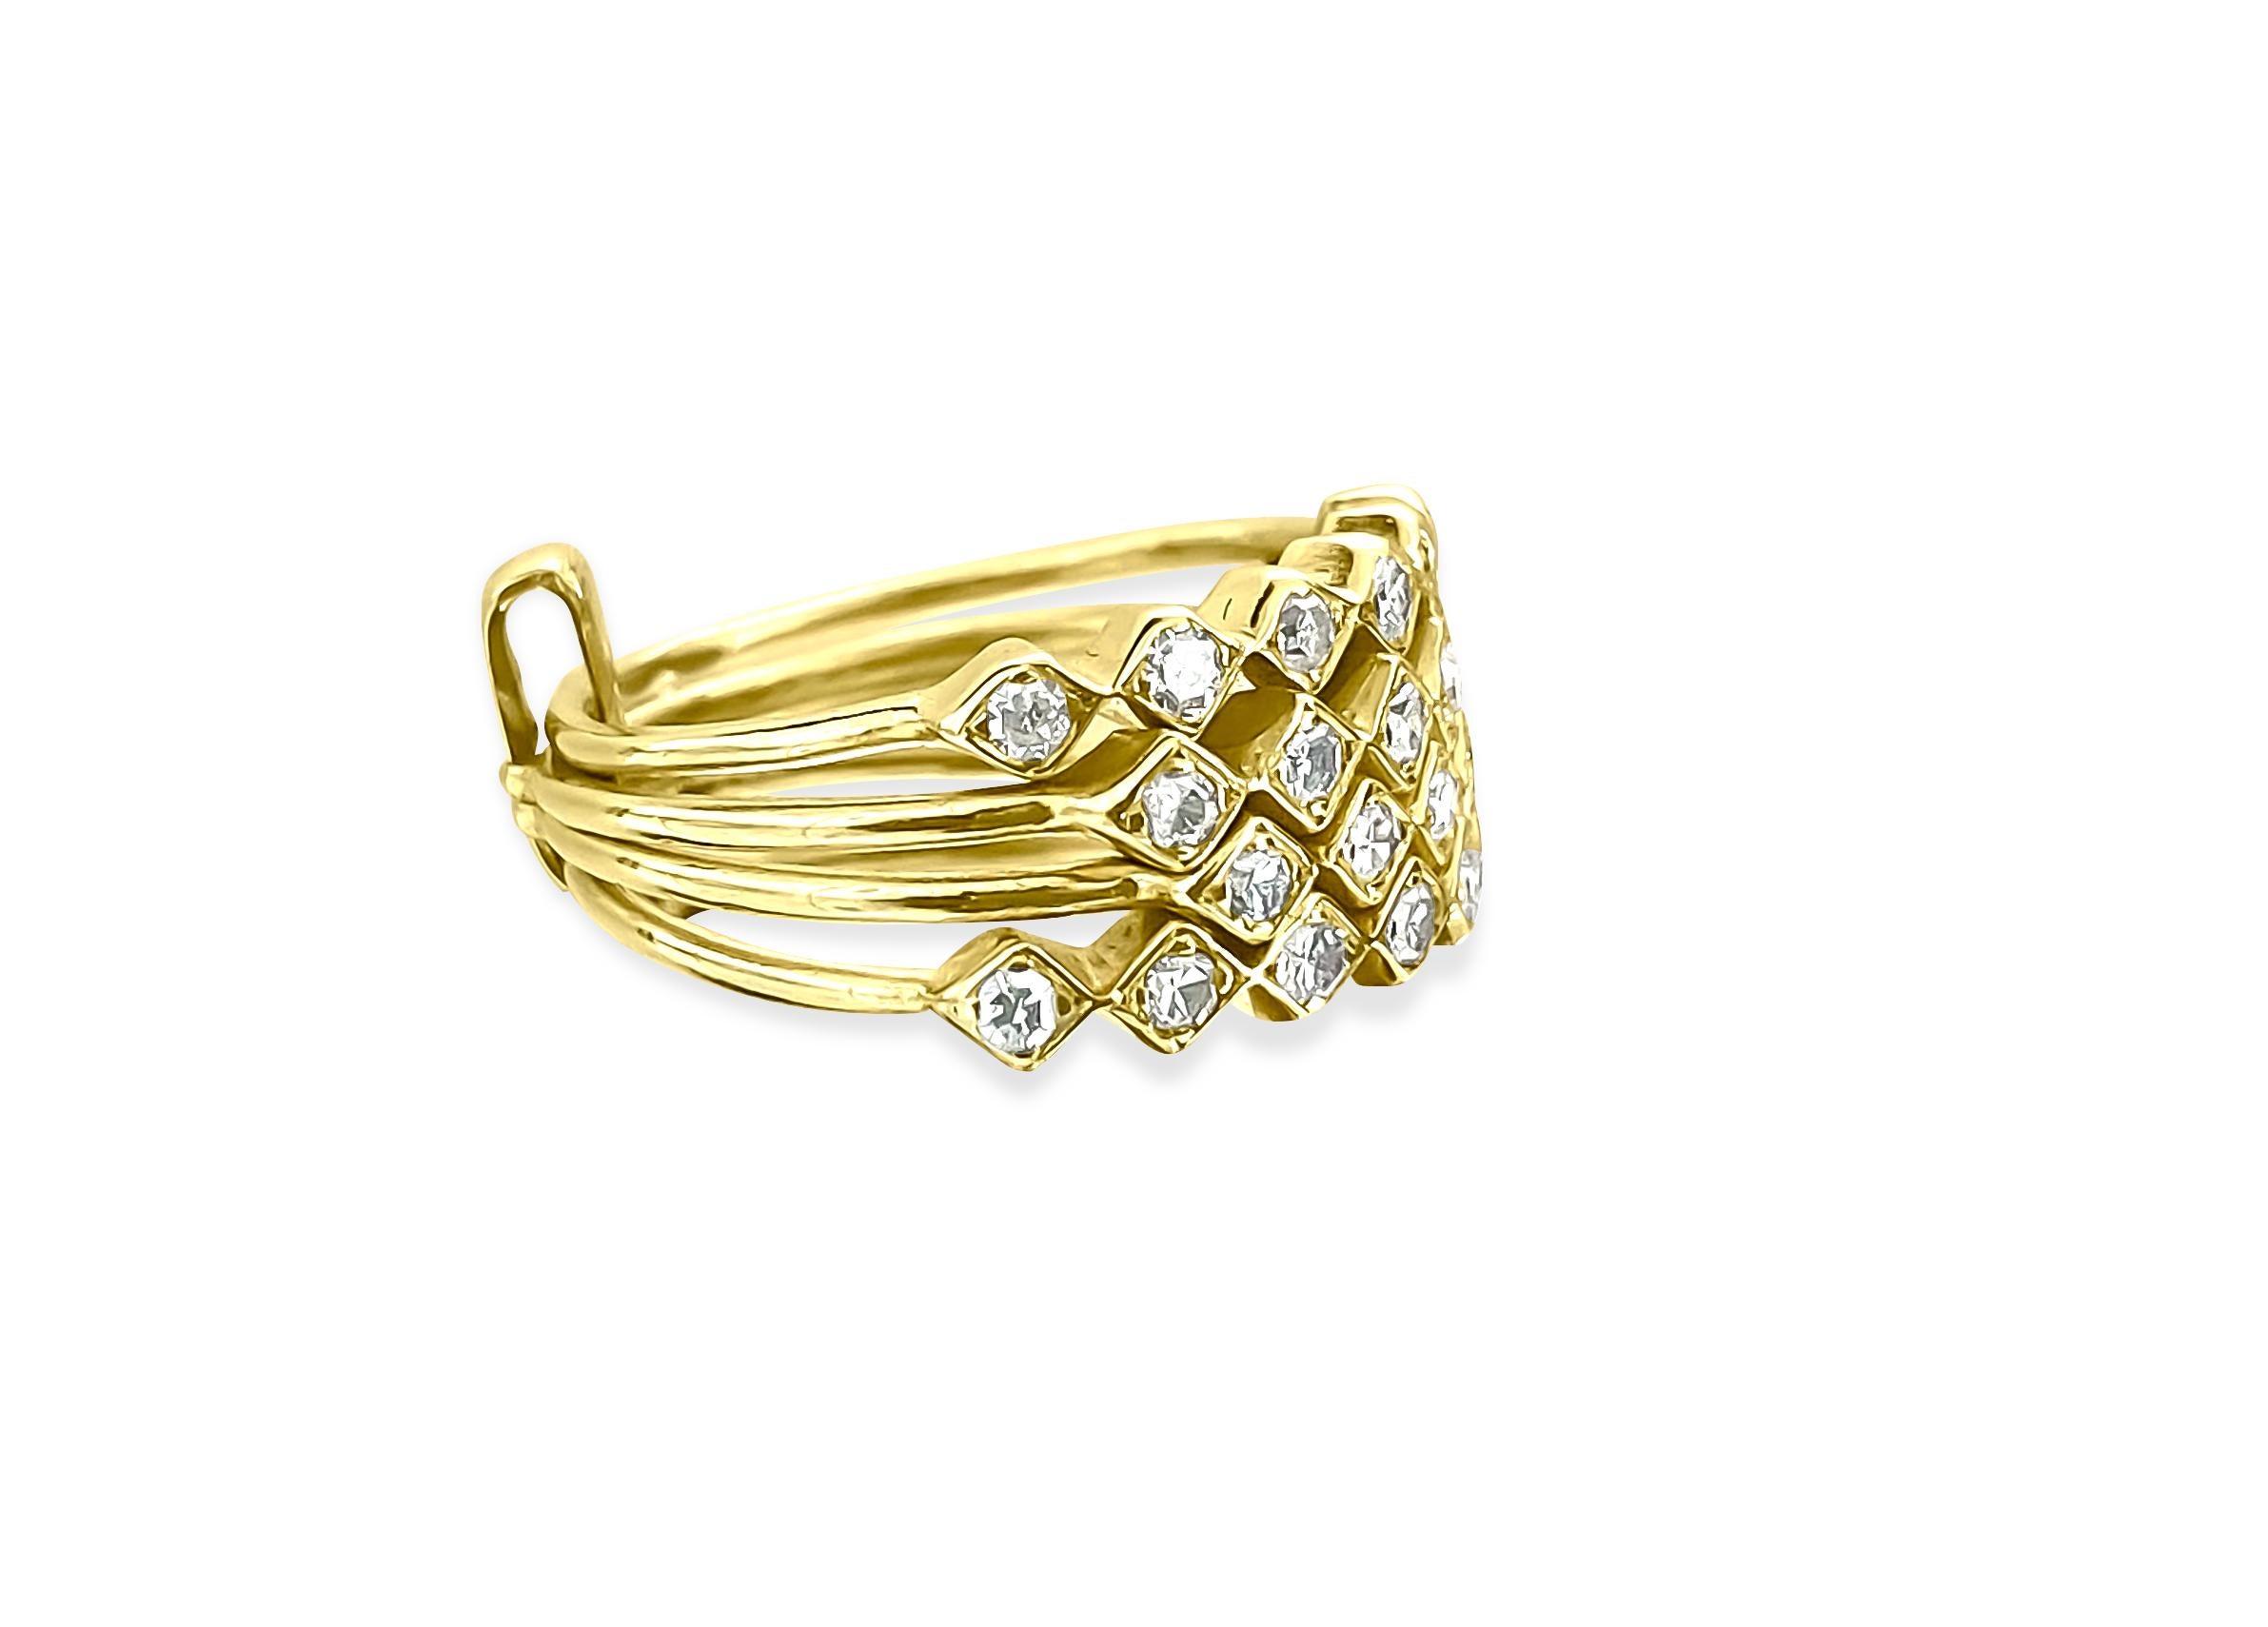 Retro Vintage 1.00 Carat Diamond Stackable Ring in 14k Gold For Sale